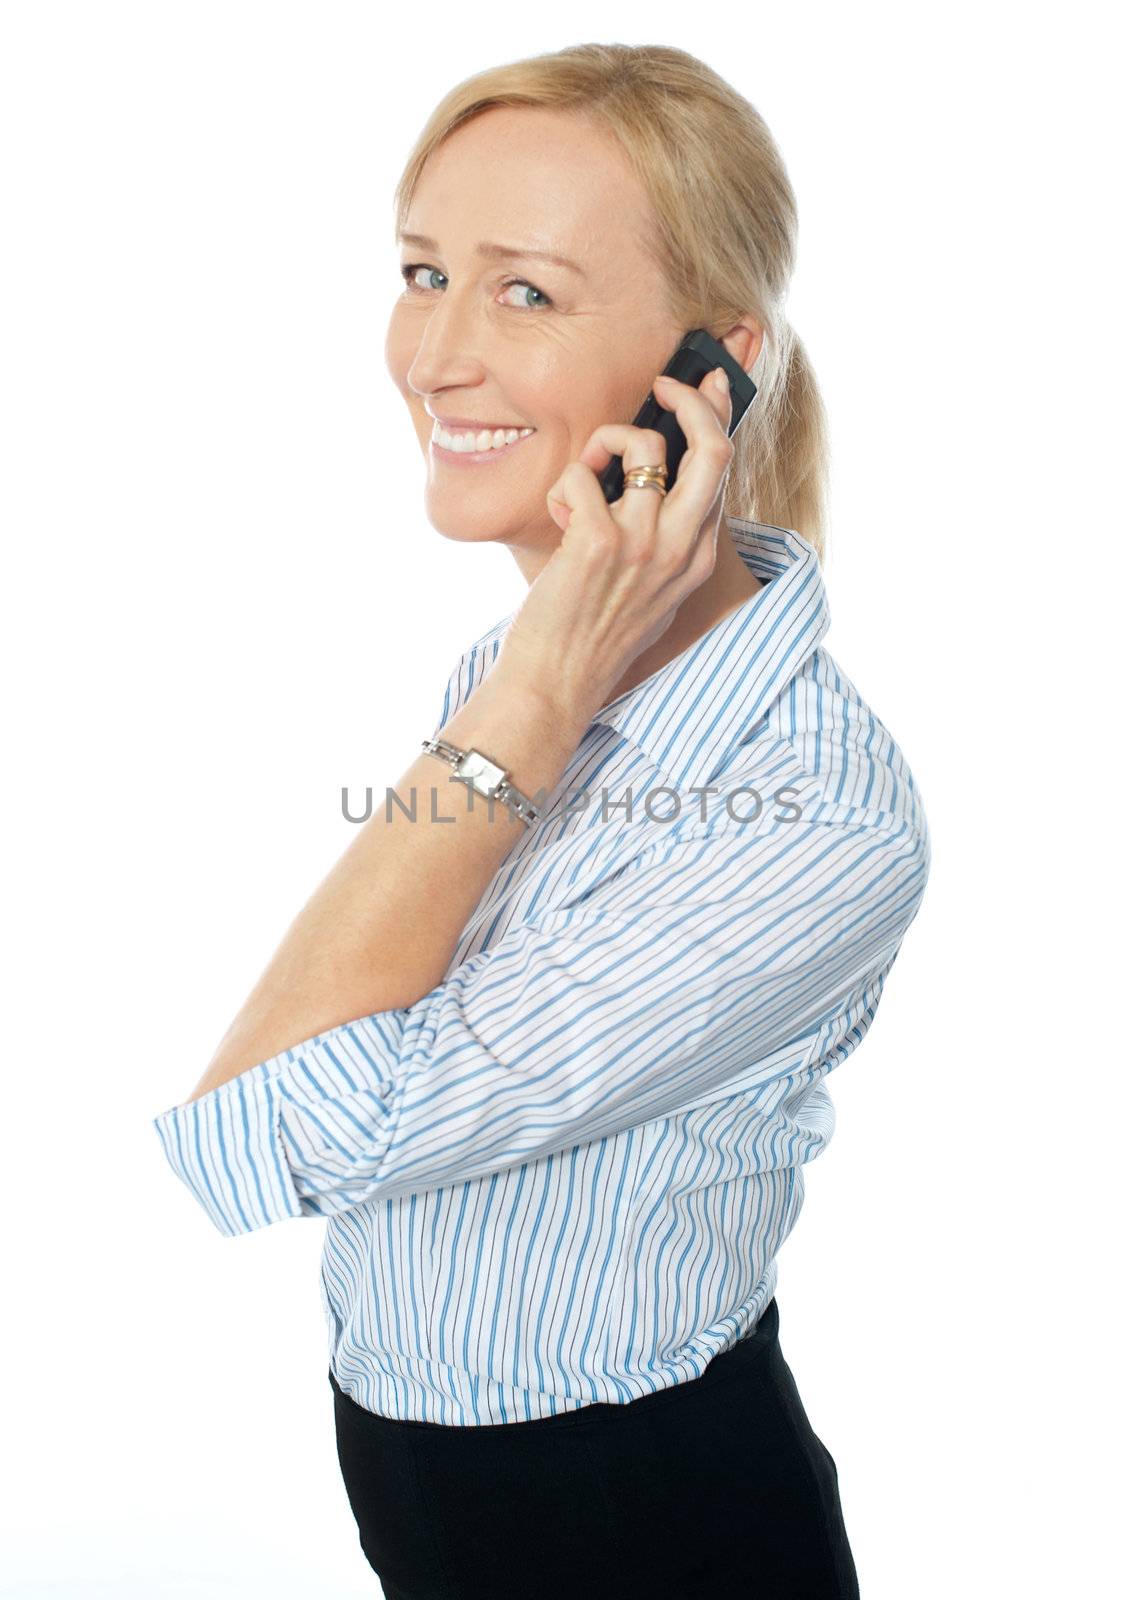 Smiling businesswoman talking on phone by stockyimages